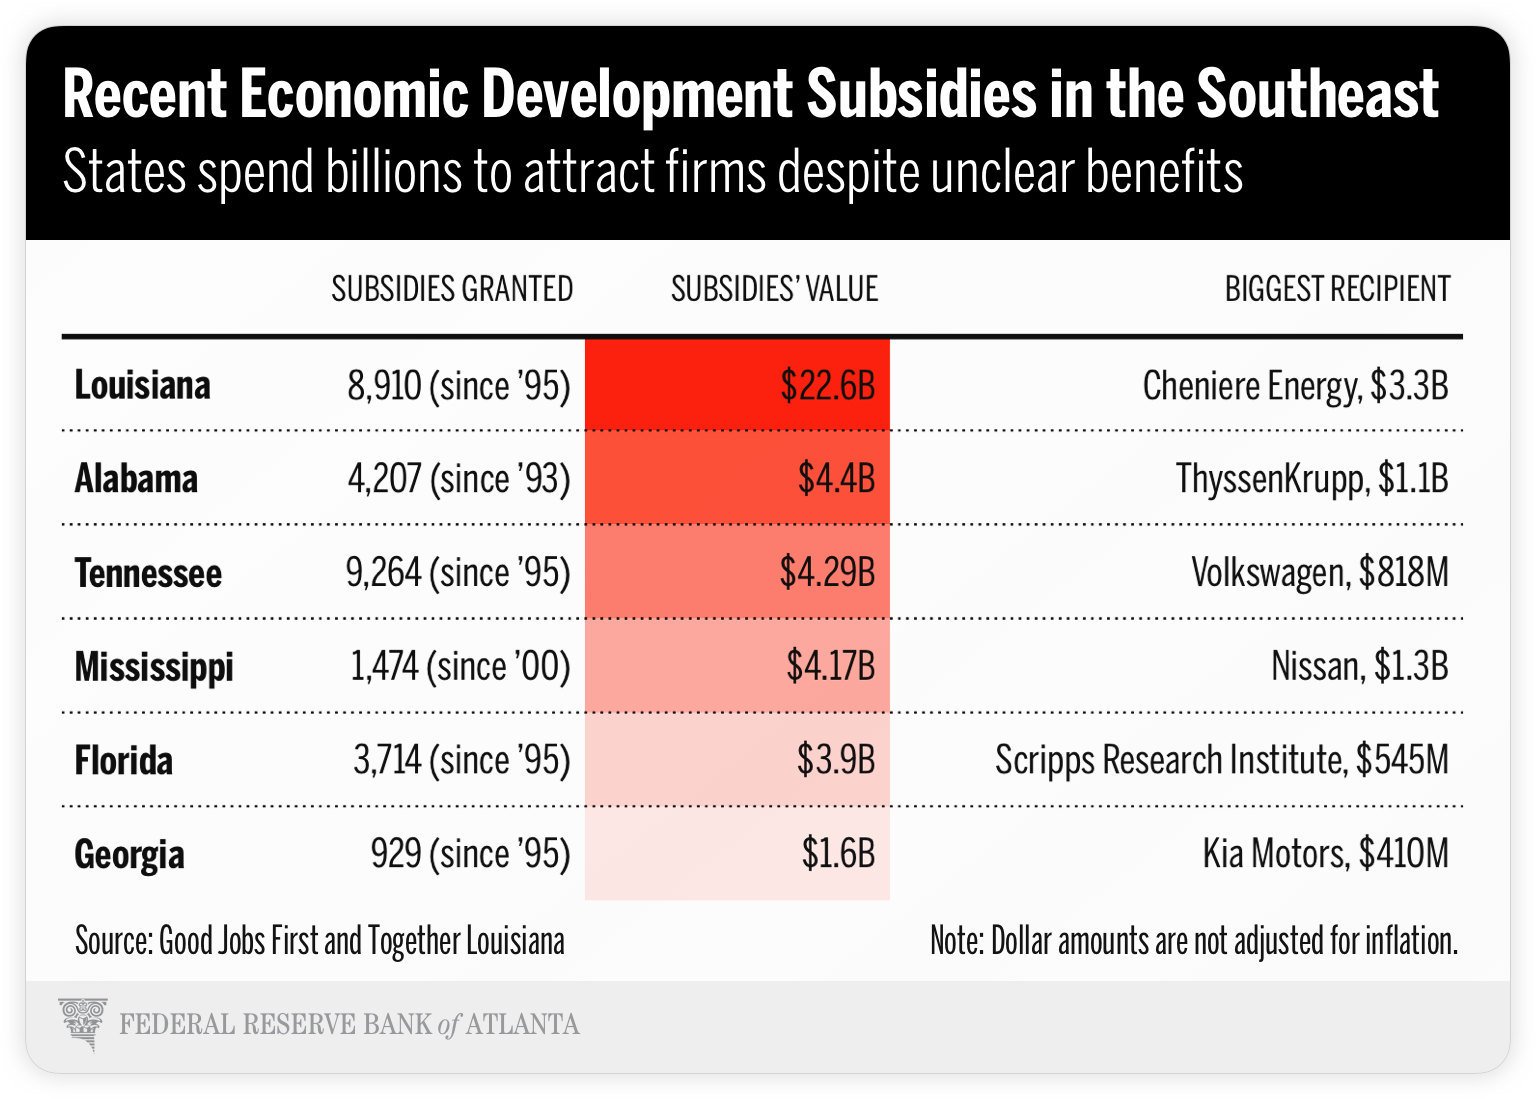 table showing recent economic development subsidies in the Southeast